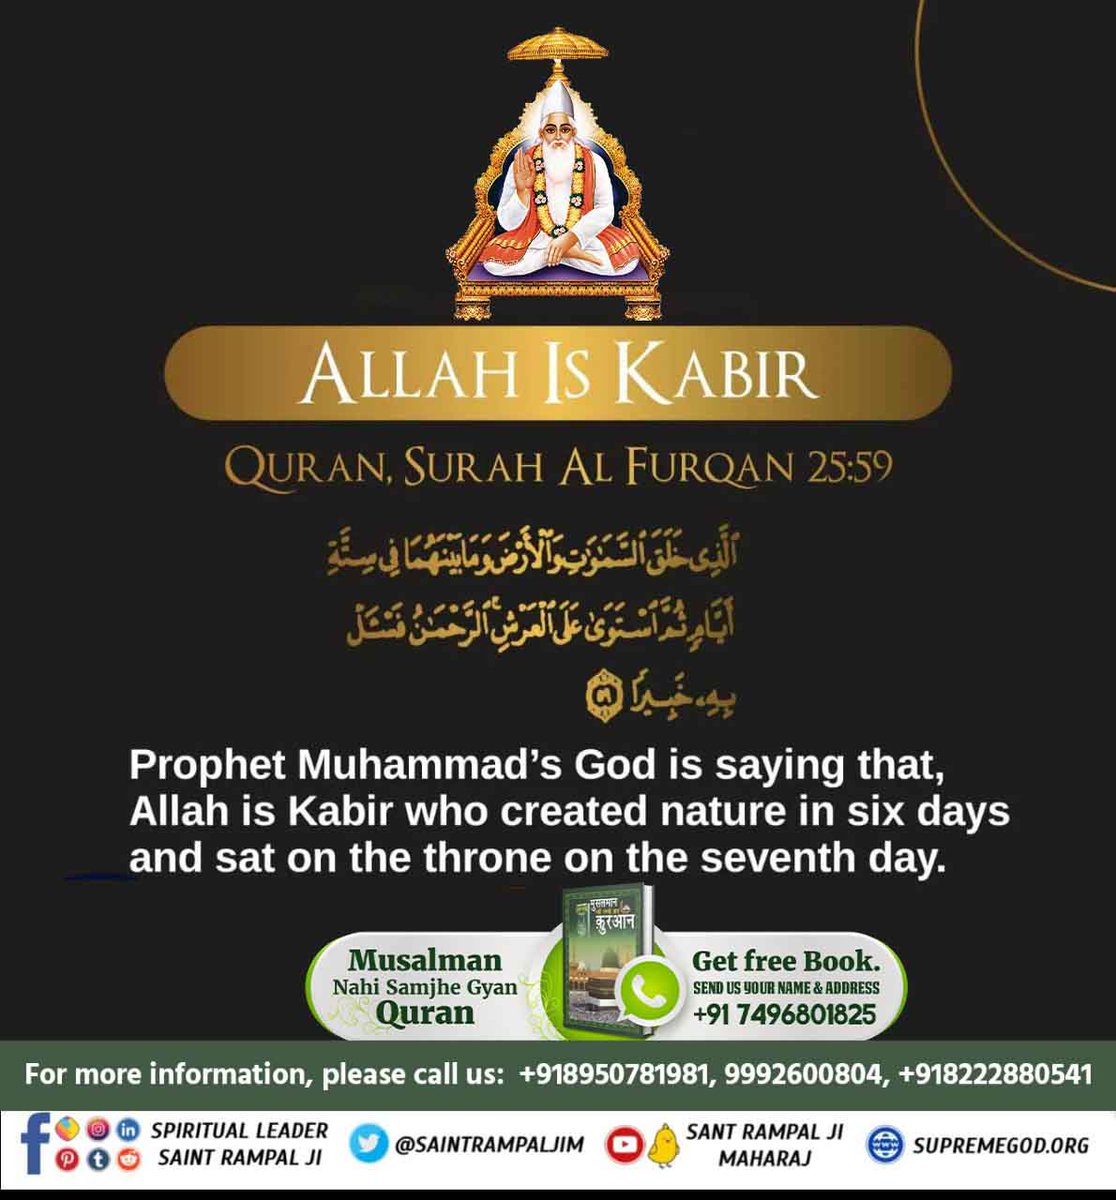 #अल्लाह_का_इल्म_बाखबर_से_पूछो The Allah who gave the knowledge of Quran asked Prophet Muhammad to seek the shelter of Bakhabar (Suraf Al-Furkan, Ayat 25:59) to know the way to Allah. Baakhabar Sant Rampal Ji